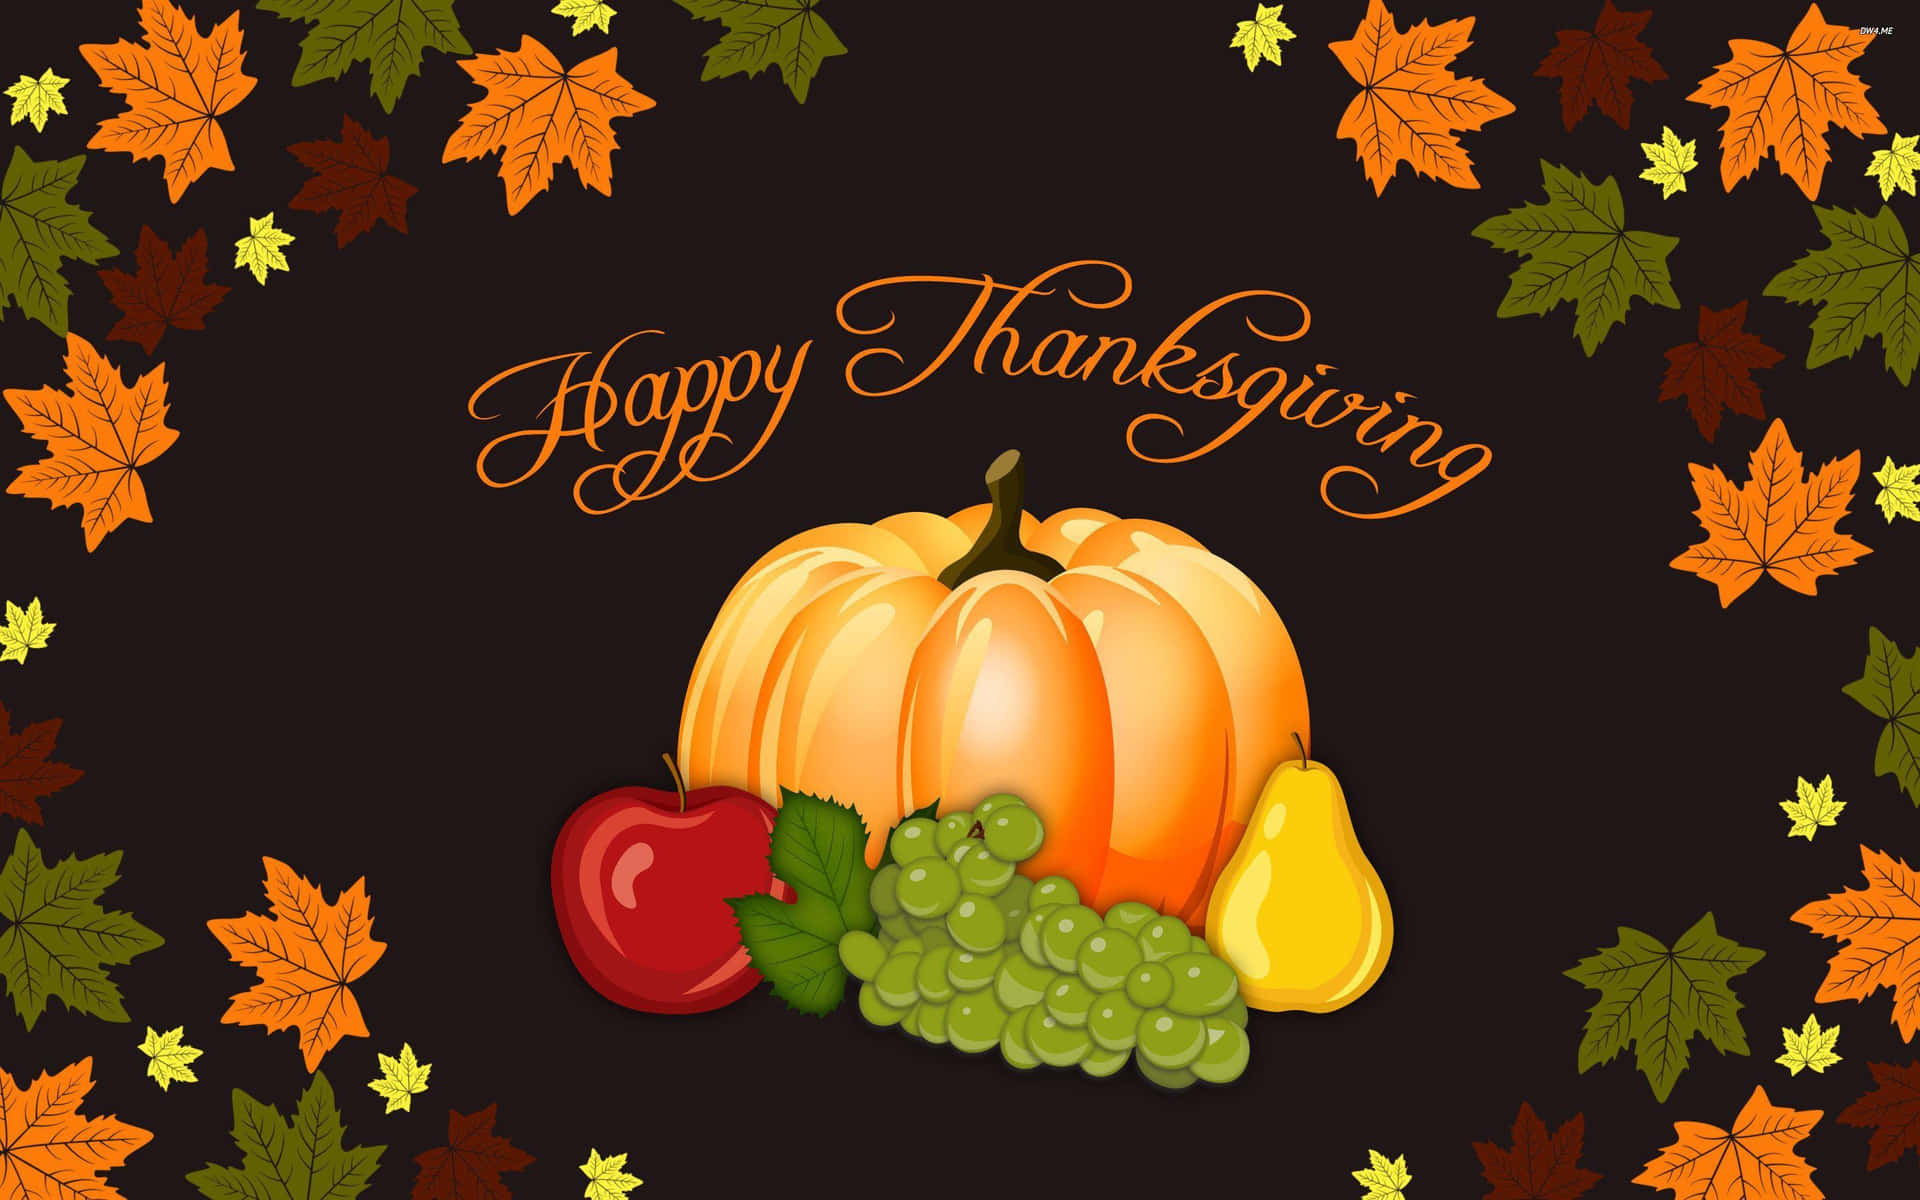 Wishing you a Happy Thanksgiving